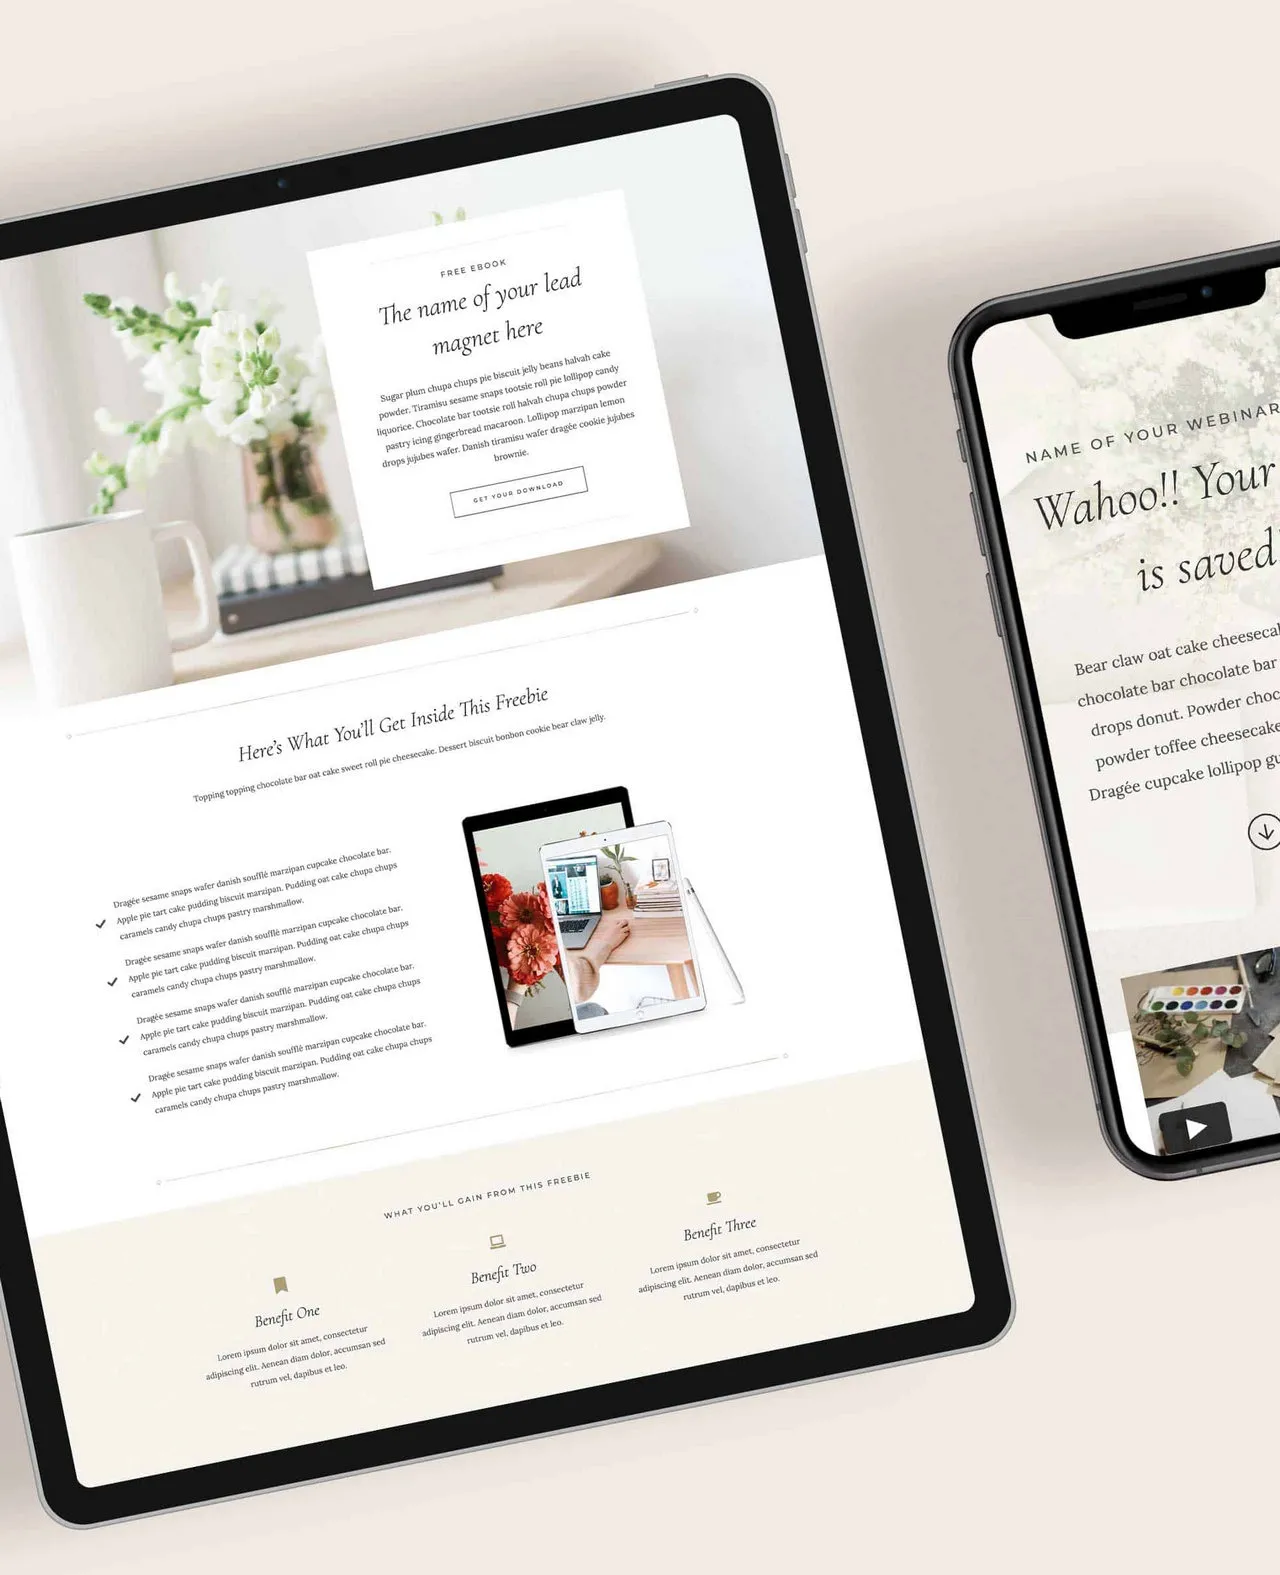 Feminine themes by Restored 316: simple, uncluttered and inviting